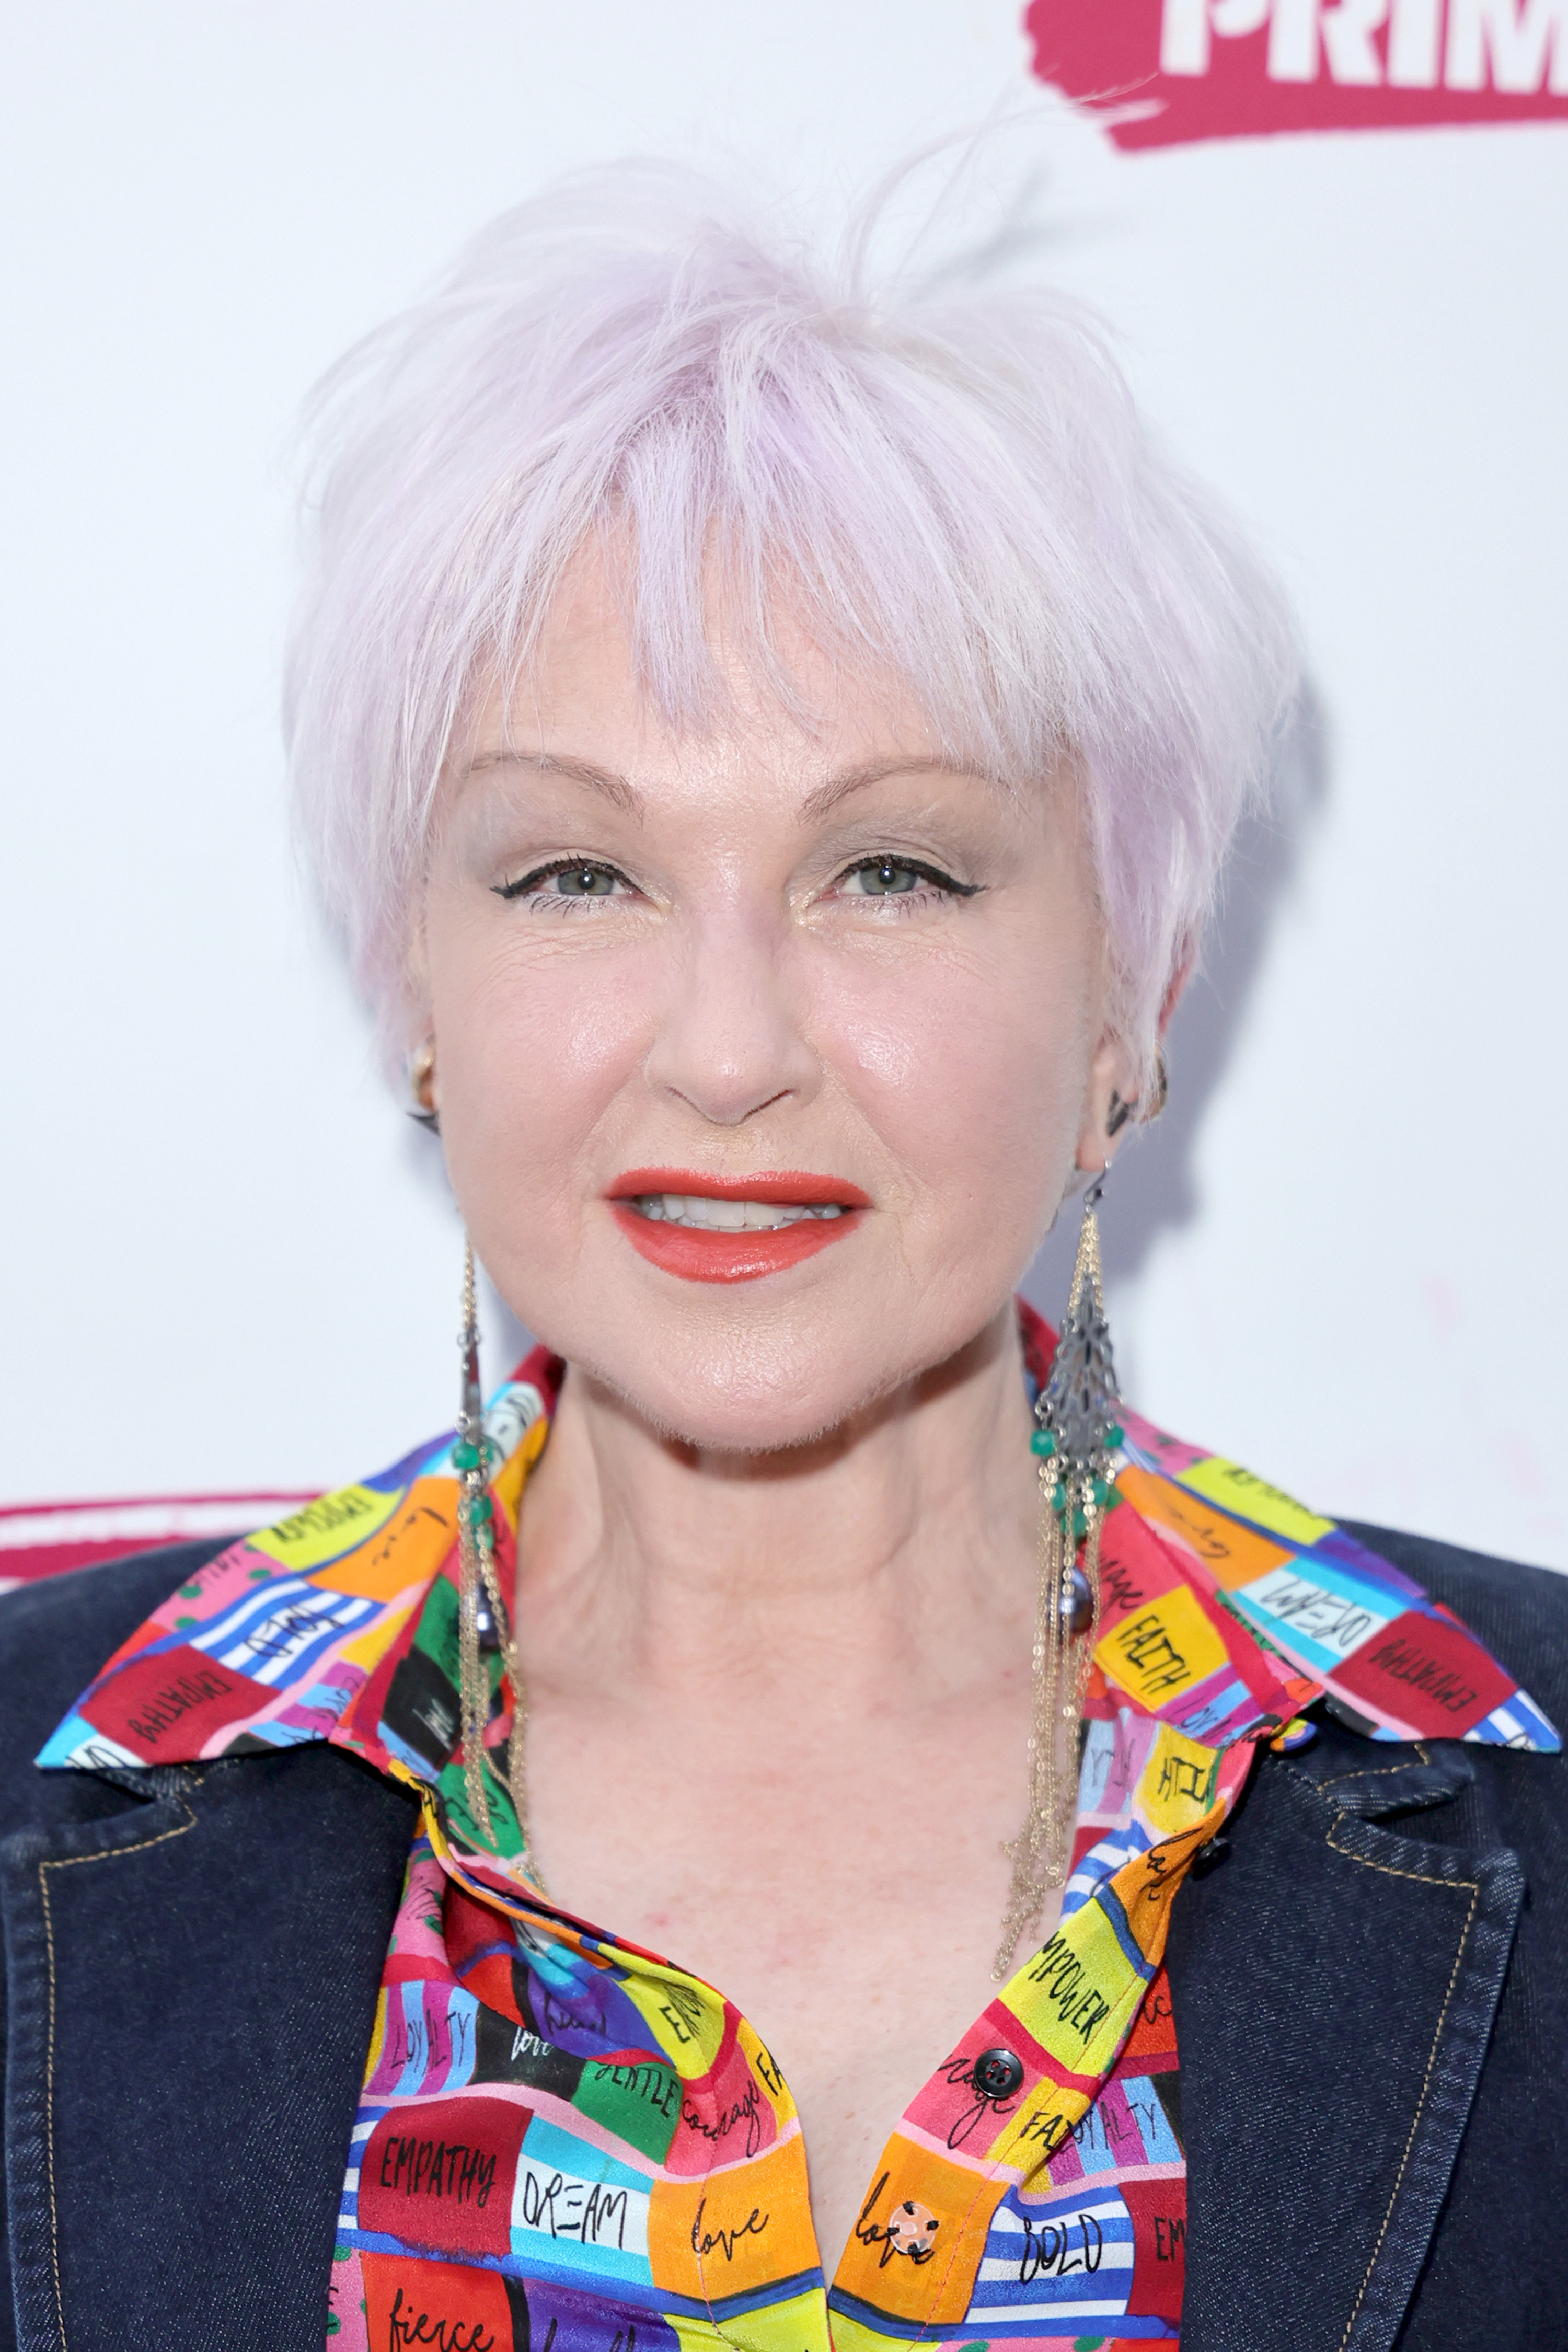 Cyndi Lauper with short hair wearing a colorful blouse and denim jacket